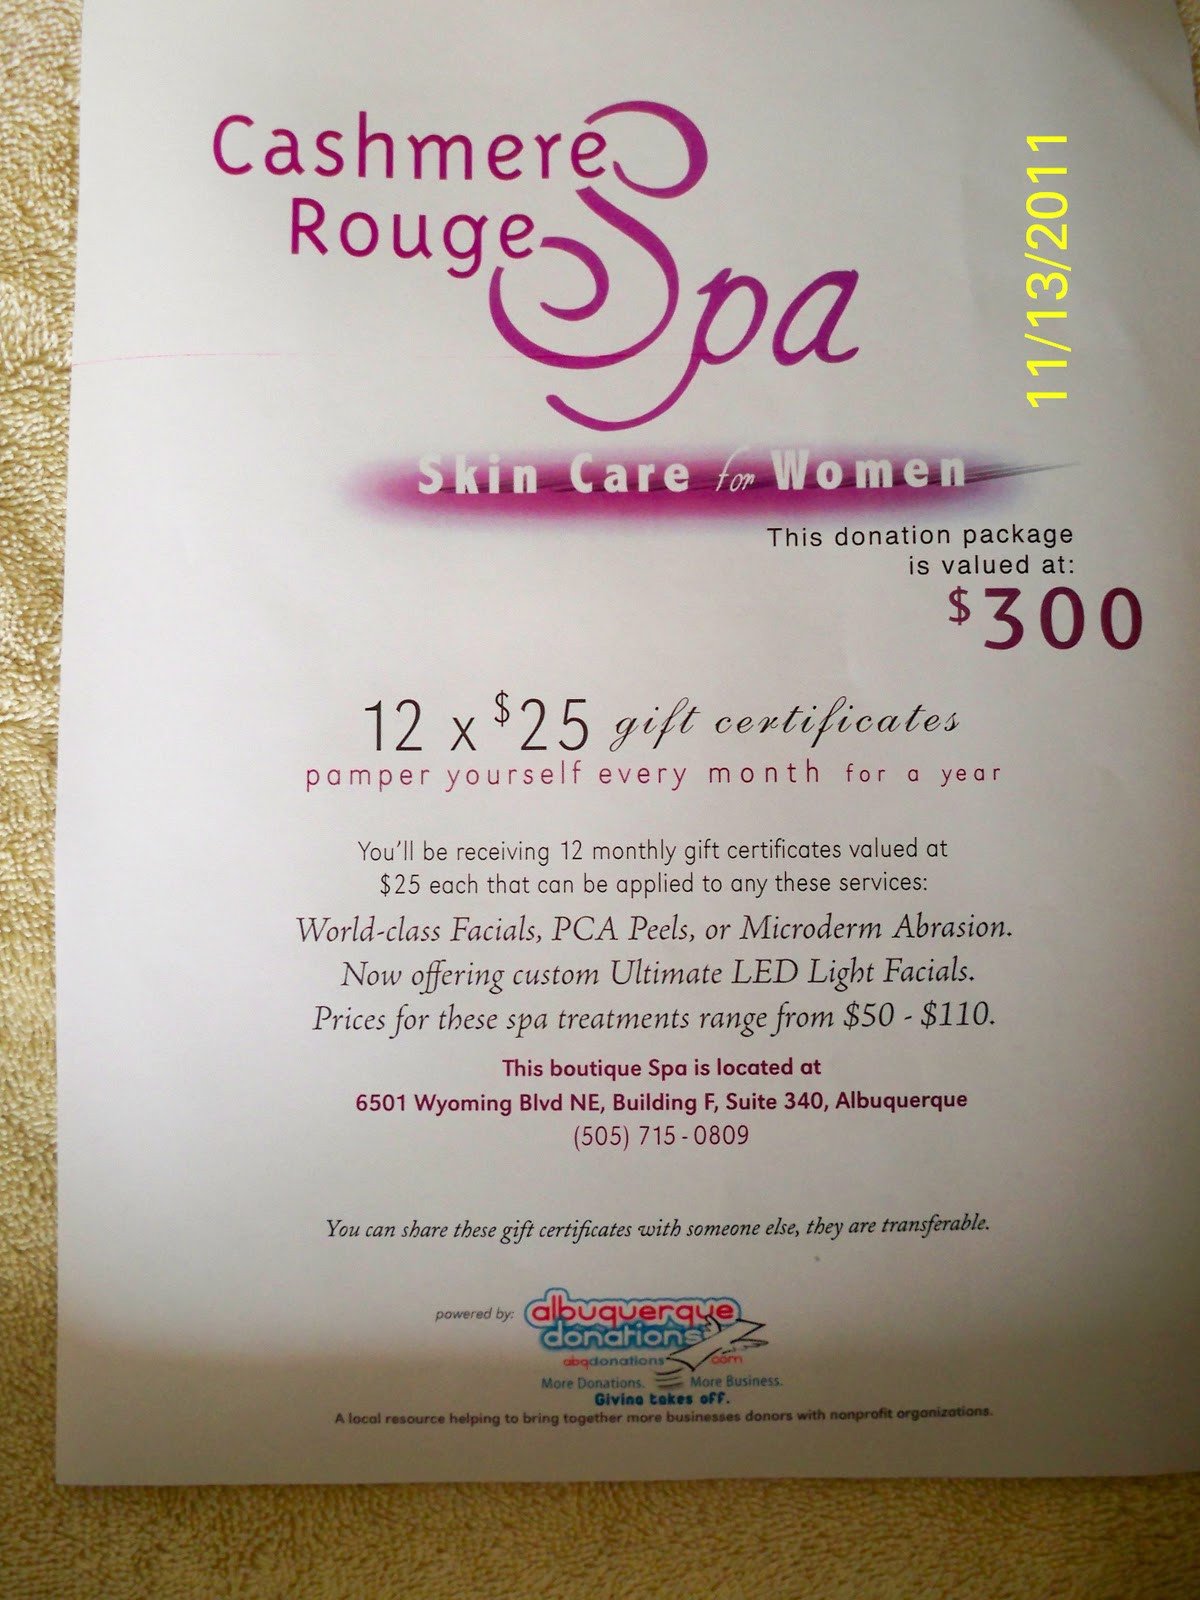 RELENTLESS FOR A CURE SILENT AUCTION Cashmere Rouge Spa